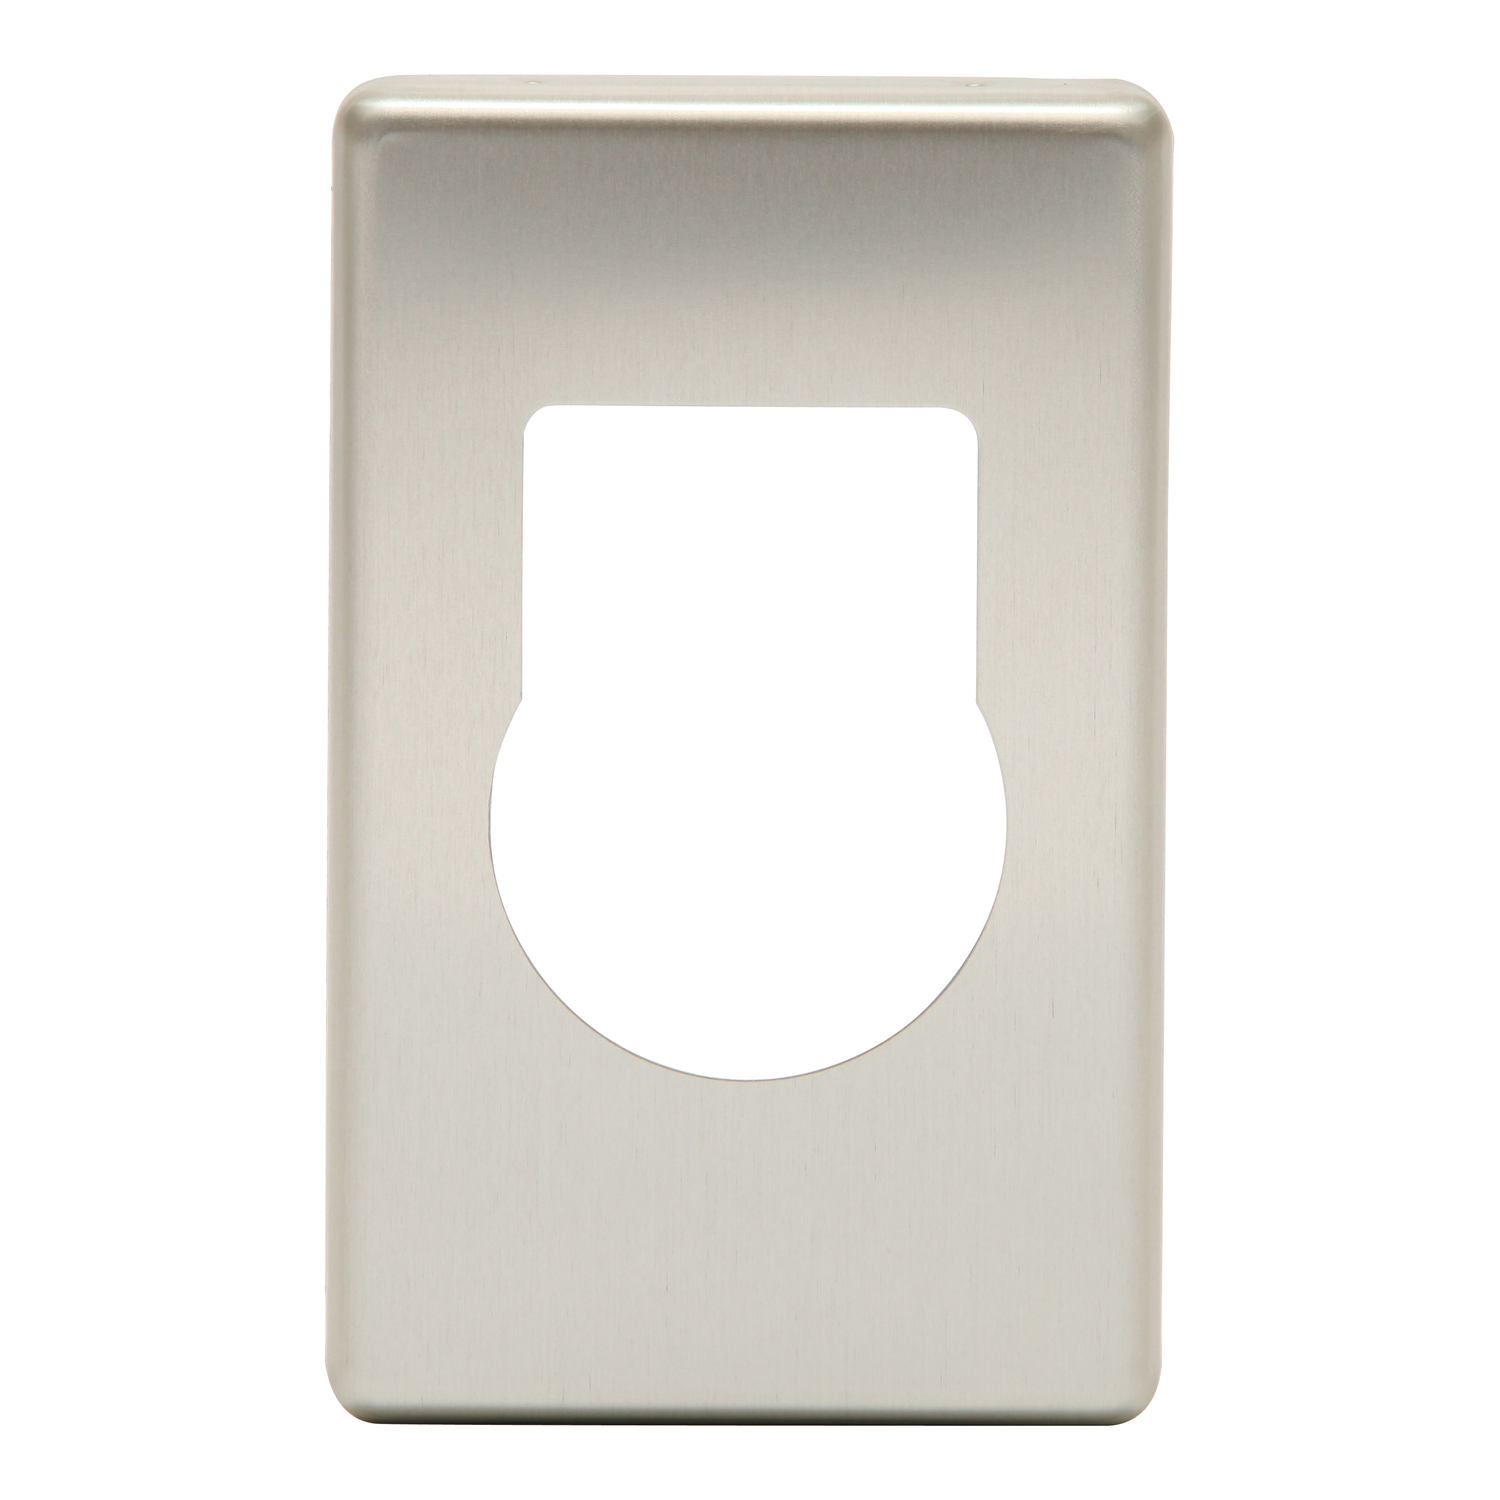 Switch Cover Plate For Rotary Timer With Shield, Stainless Steel